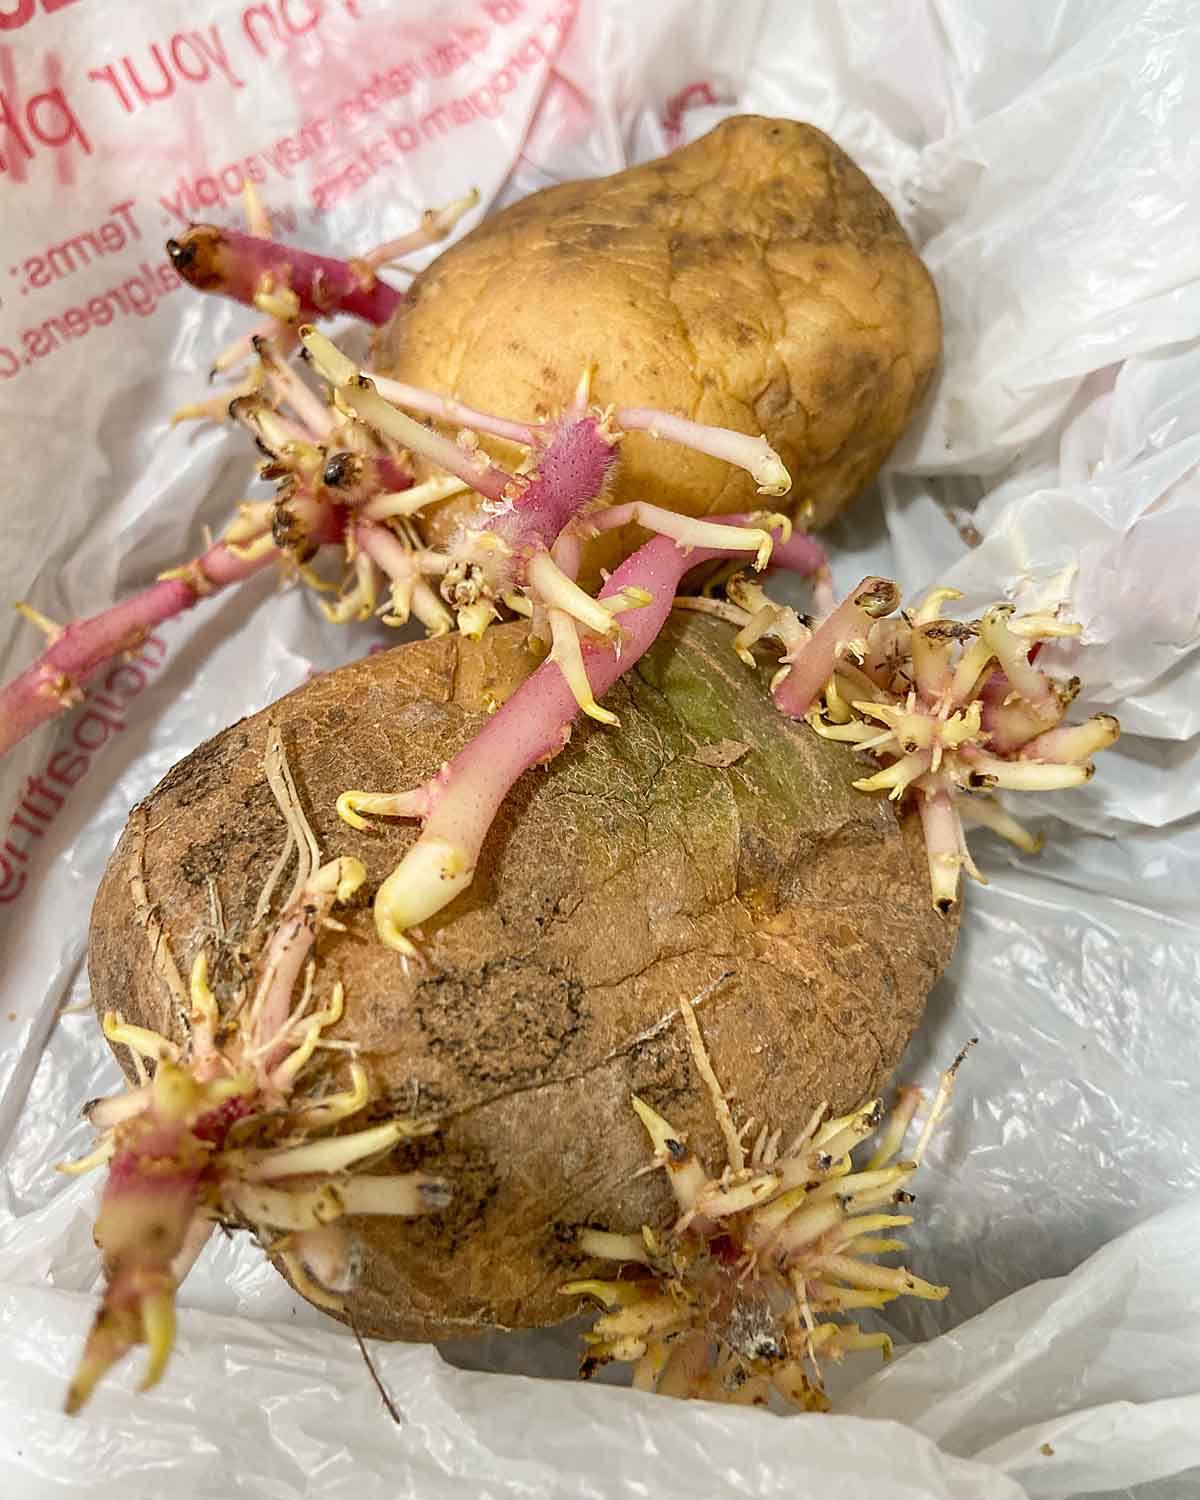 sprouting potatoes